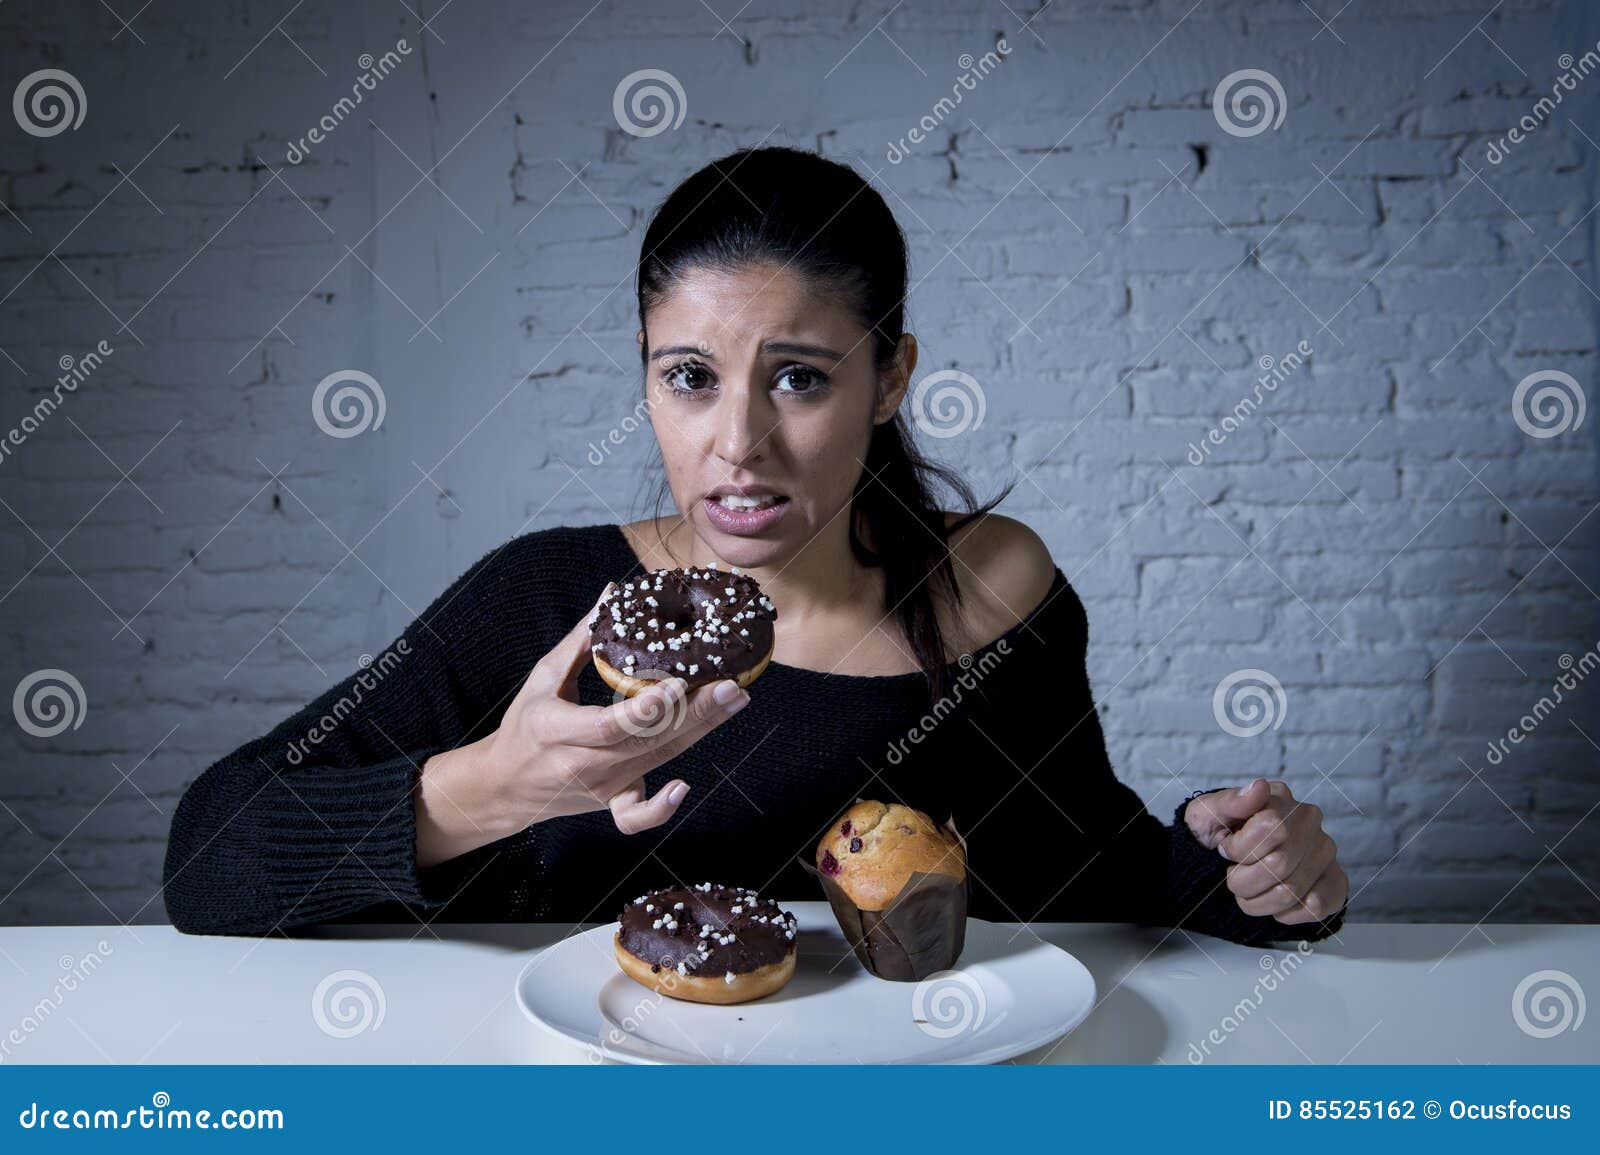 woman sitting at table feeling guilty forgetting diet eating dish full of junk sugary unhealthy food